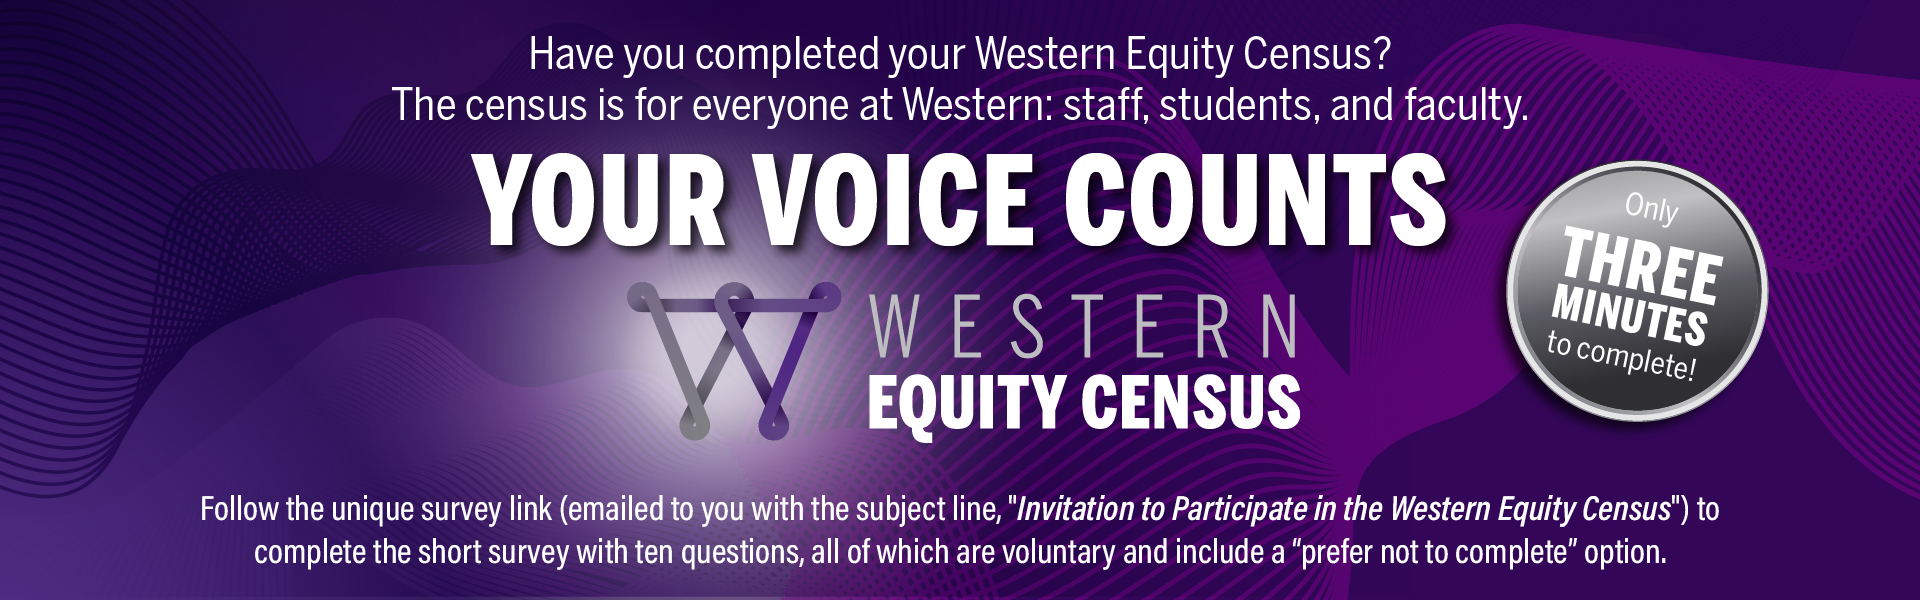 Text reading Have you completed your Western Equity Census? The census is for everyone at Western: staff, students, and faculty. Your Voice Counts. Western Equity Census logo. Follow the unique survey link emailed to you with the subject line "Invitation to participate in the Western Equity Census" to complete the short survey with ten questions, all of which are voluntary and include a prefer not to complete option. Only three minutes to complete!